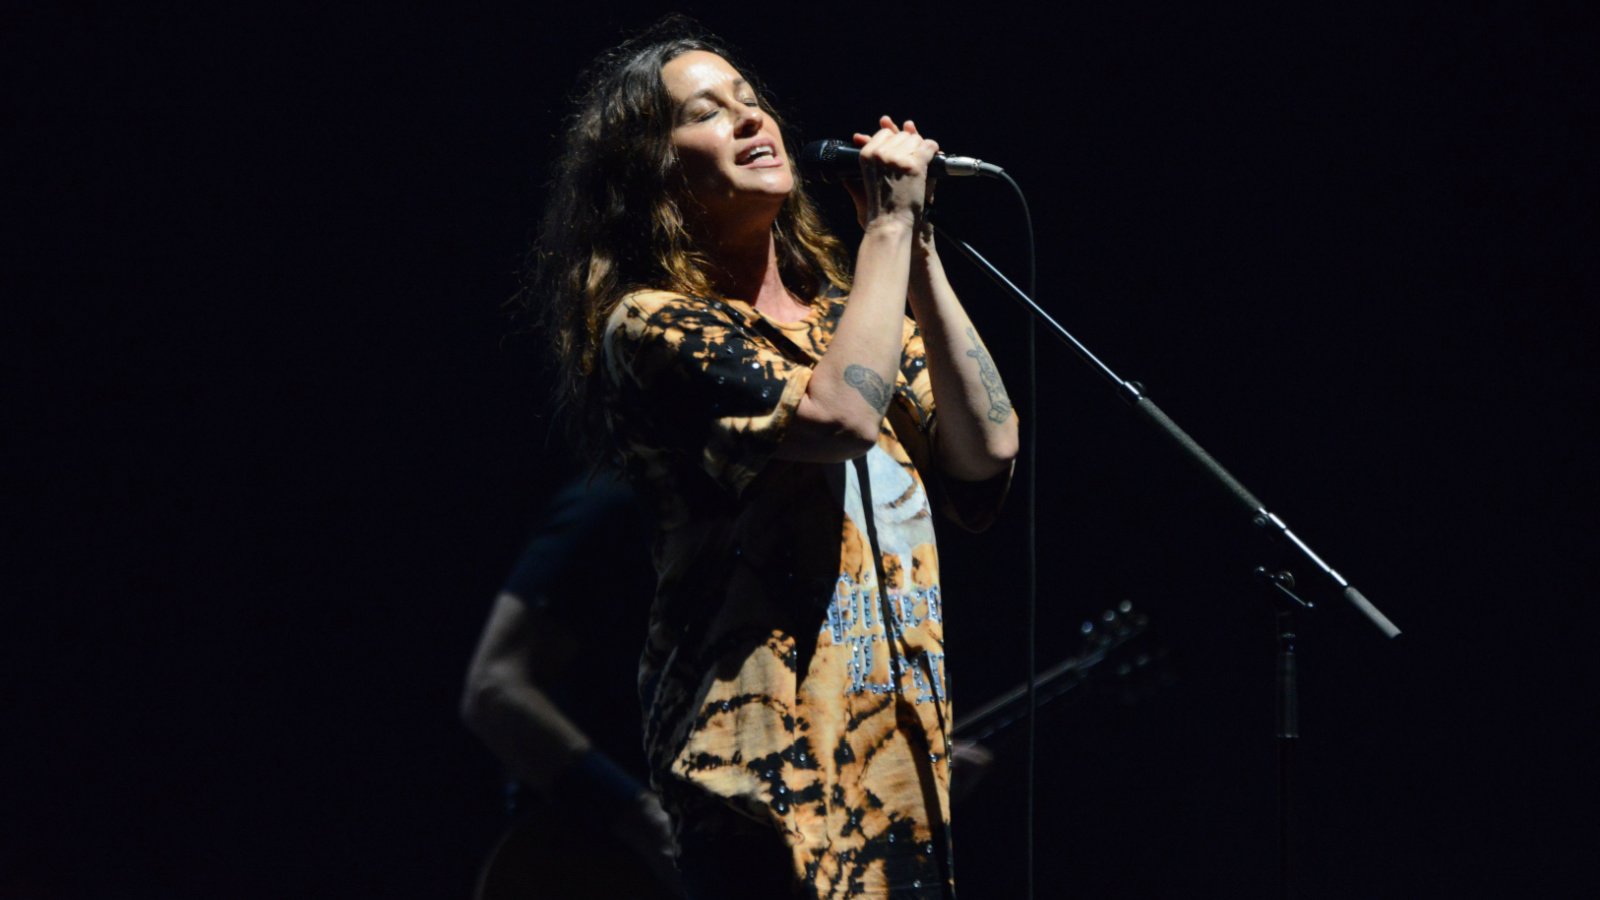 <p>Alanis Morrissette may never match the commercial success of Jagged Little Pill, her unforgettable album release from 1995. She is, however, still recording, and several commenters urge us to listen to more of her material.</p>